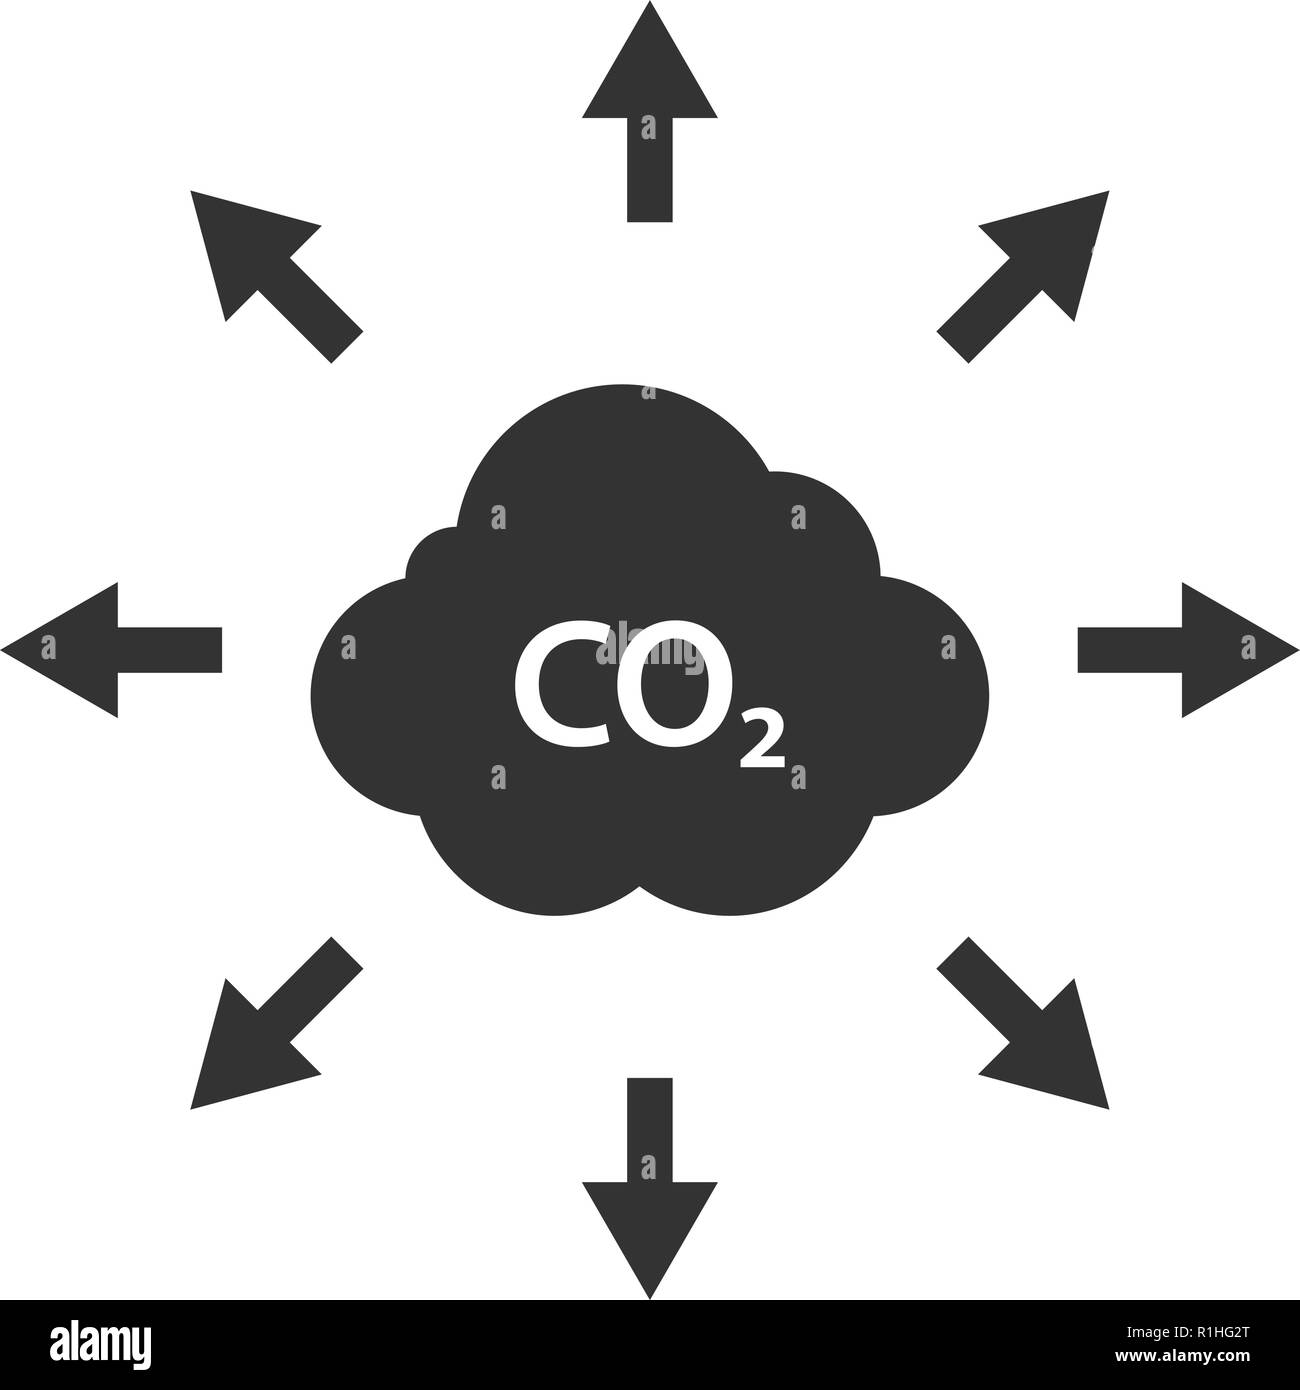 Reduce Carbon Emissions Black And White Stock Photos Images Alamy